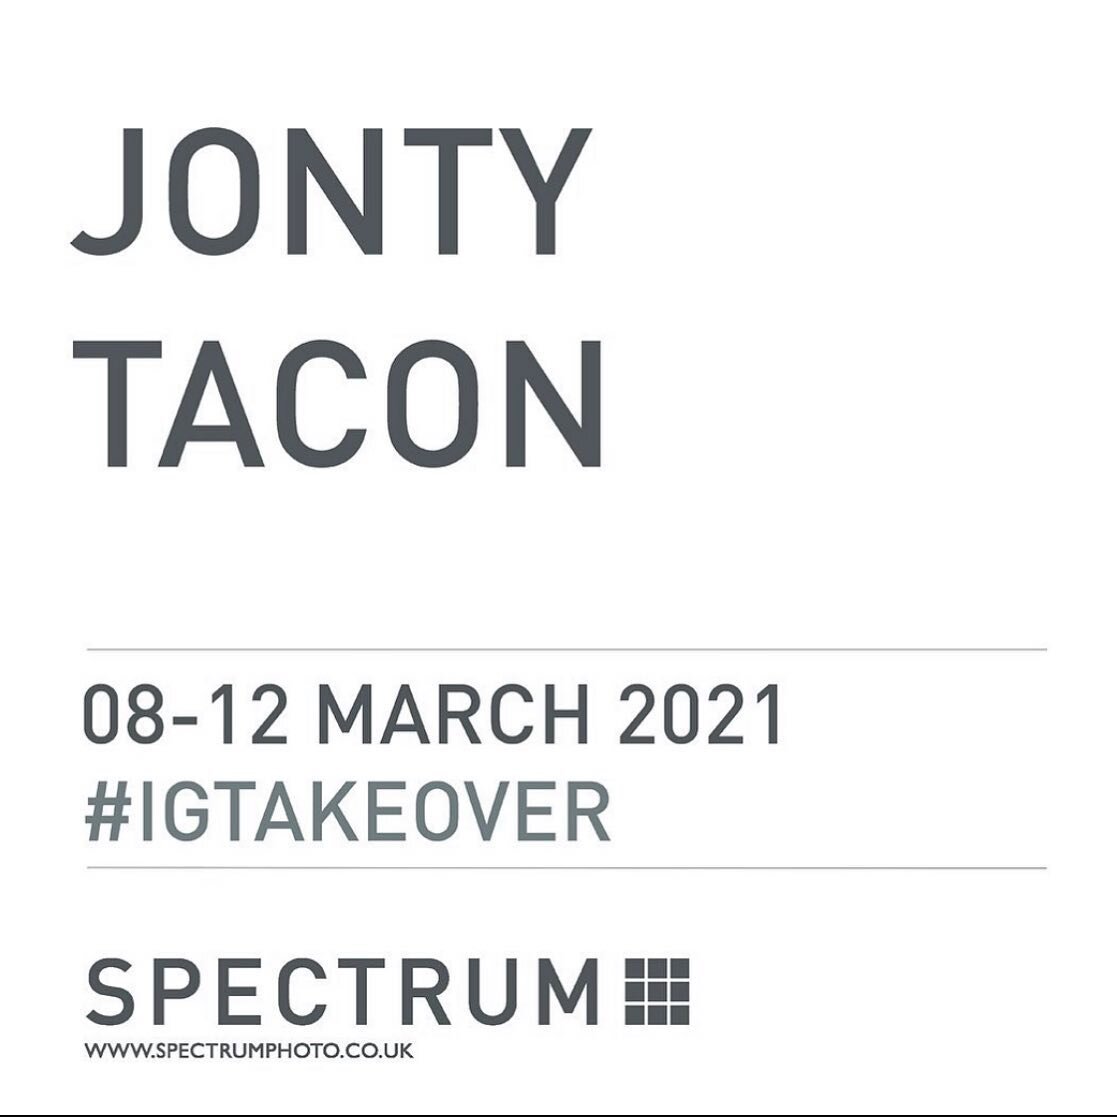 Excited to see @jontytacon taking over the @spectrumlab Instagram for the next five days! Follow them to see the photos and read his story #photography #brexit #sevensisters #igtakeover